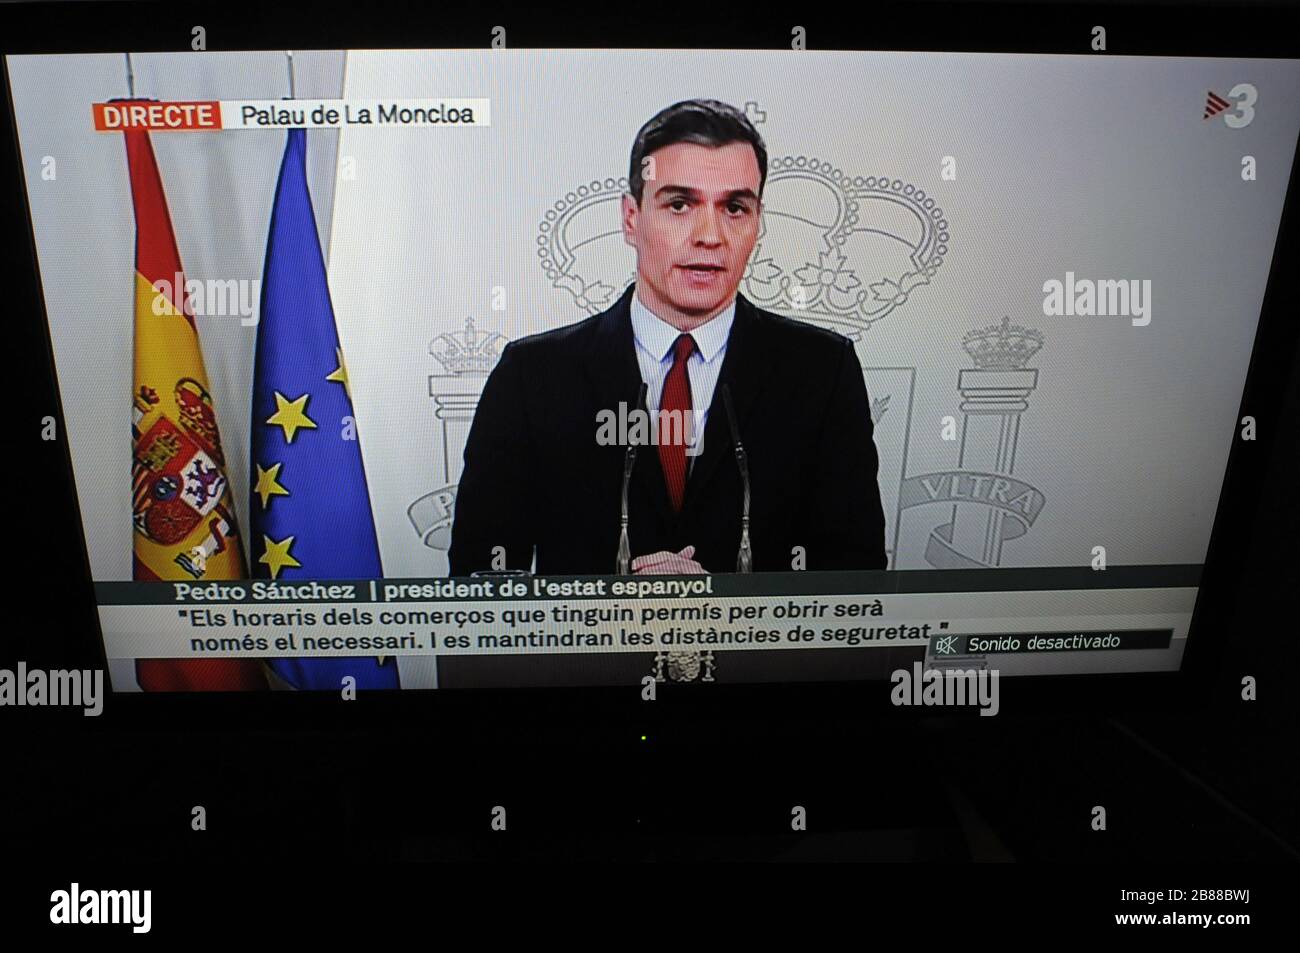 The President of the Spanish state, Pedro Sanchez transmits to citizens by television the state of the alarm in Spain due to the risk of infection of Stock Photo